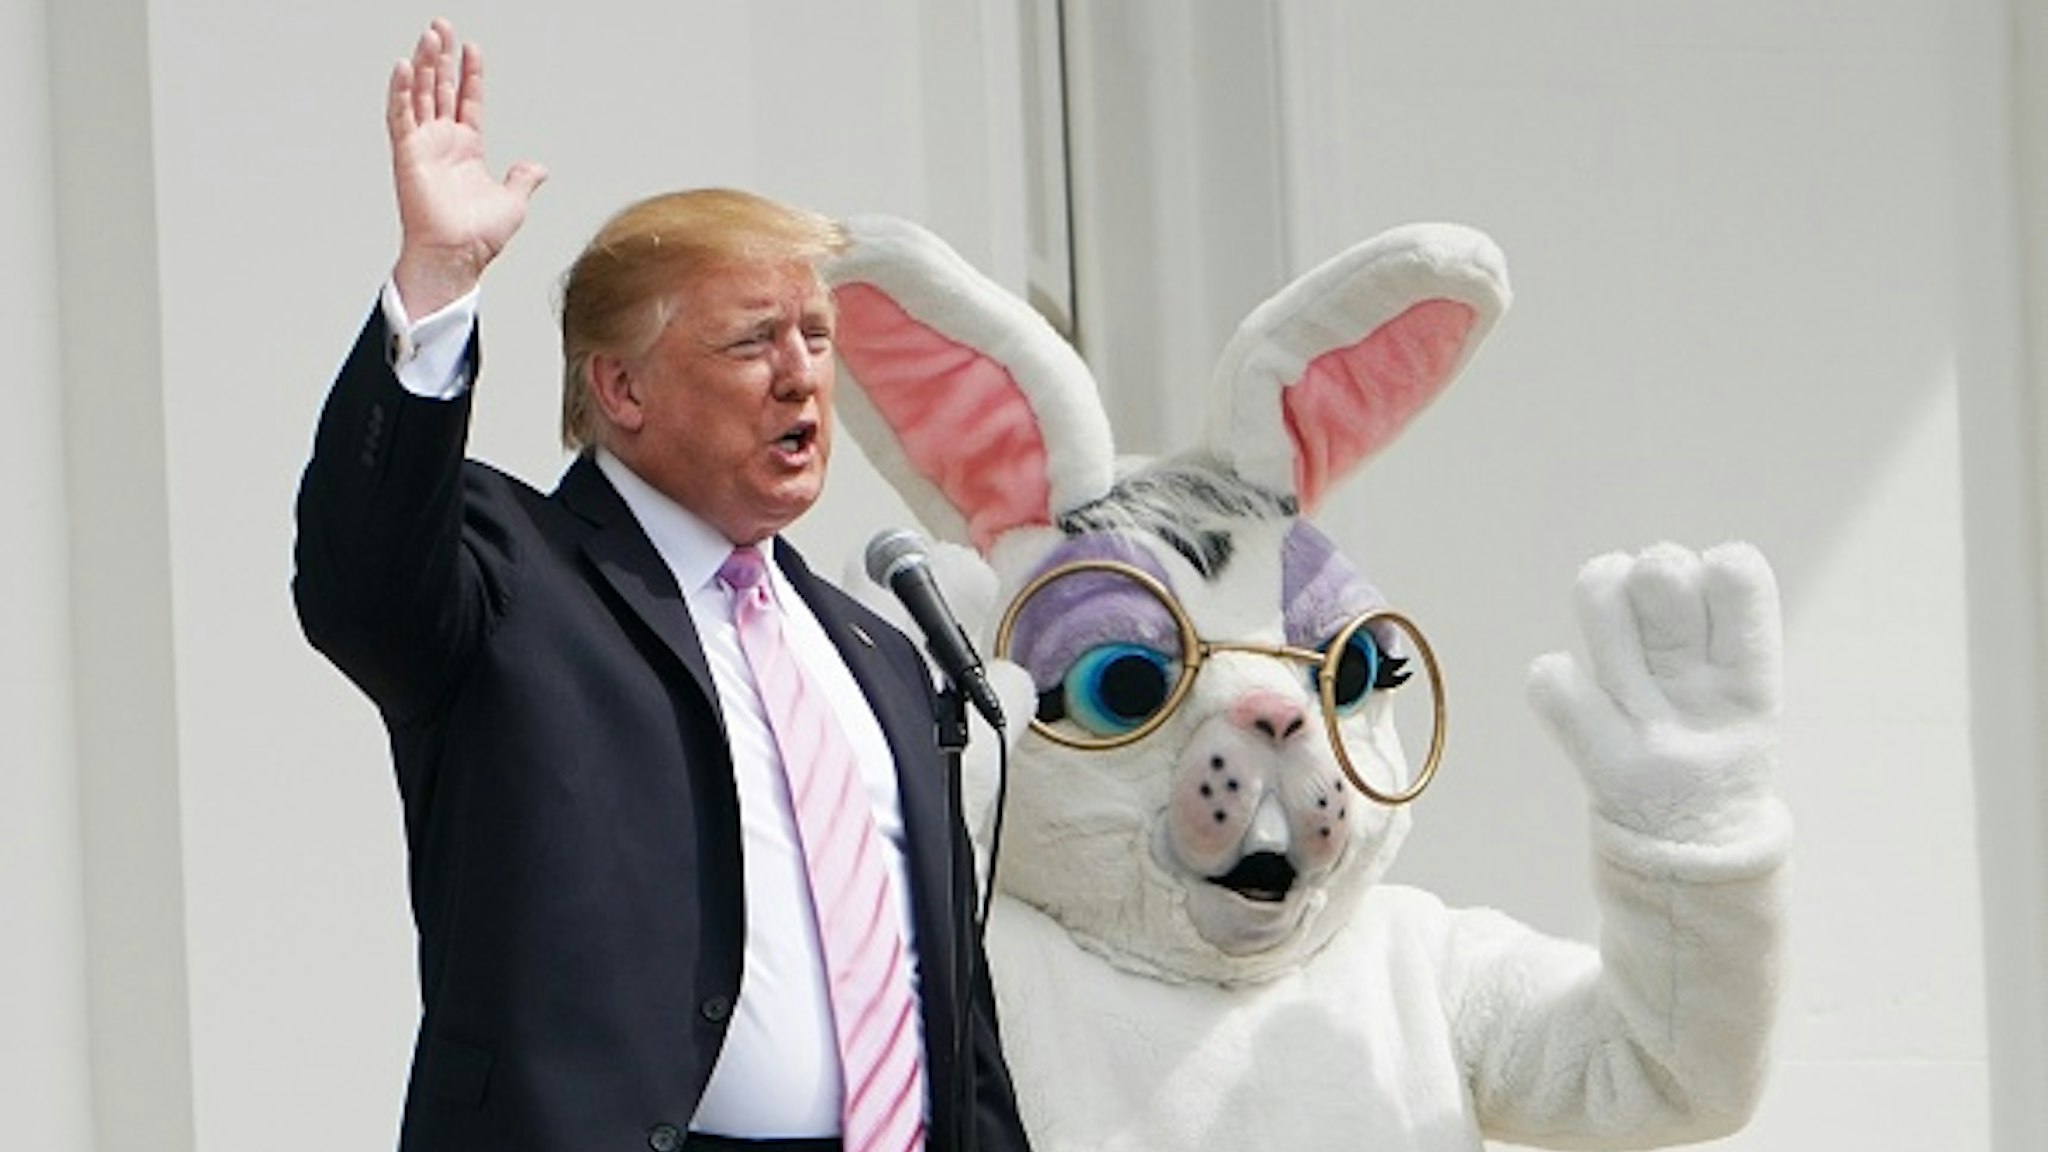 TOPSHOT - US President Donald Trump and the Easter Bunny wave during the annual White House Easter Egg Roll on the South Lawn of the White House in Washington, DC on April 22, 2019.